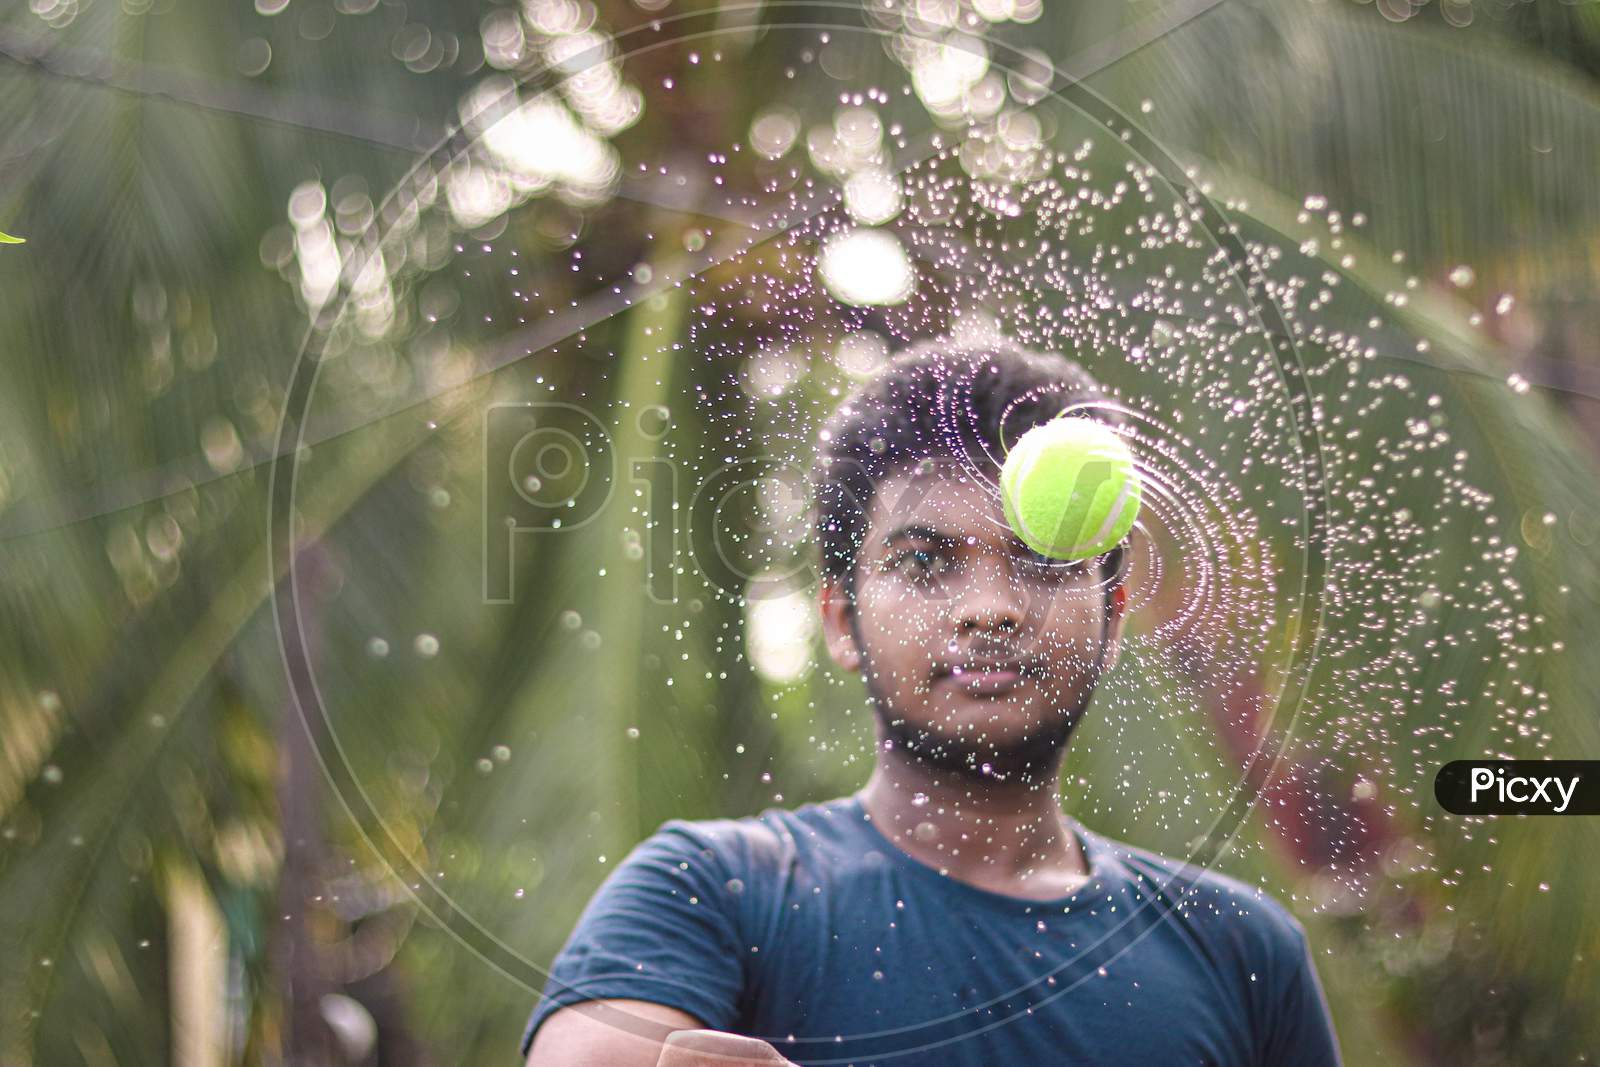 Water galaxy  with wet tennis ball in front of a Asian man